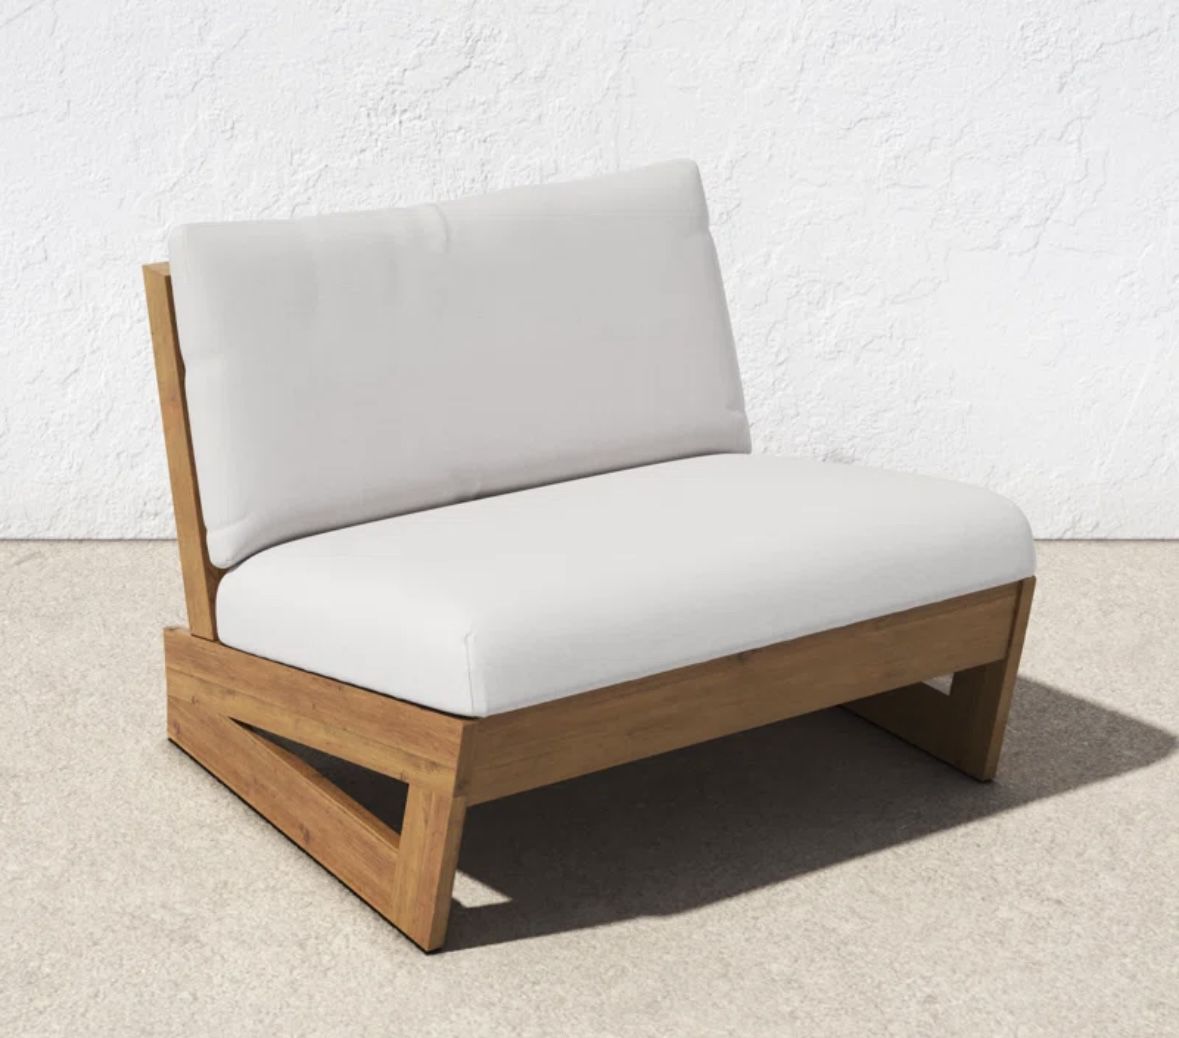 NEW Wood Patio Chair With White Cushions